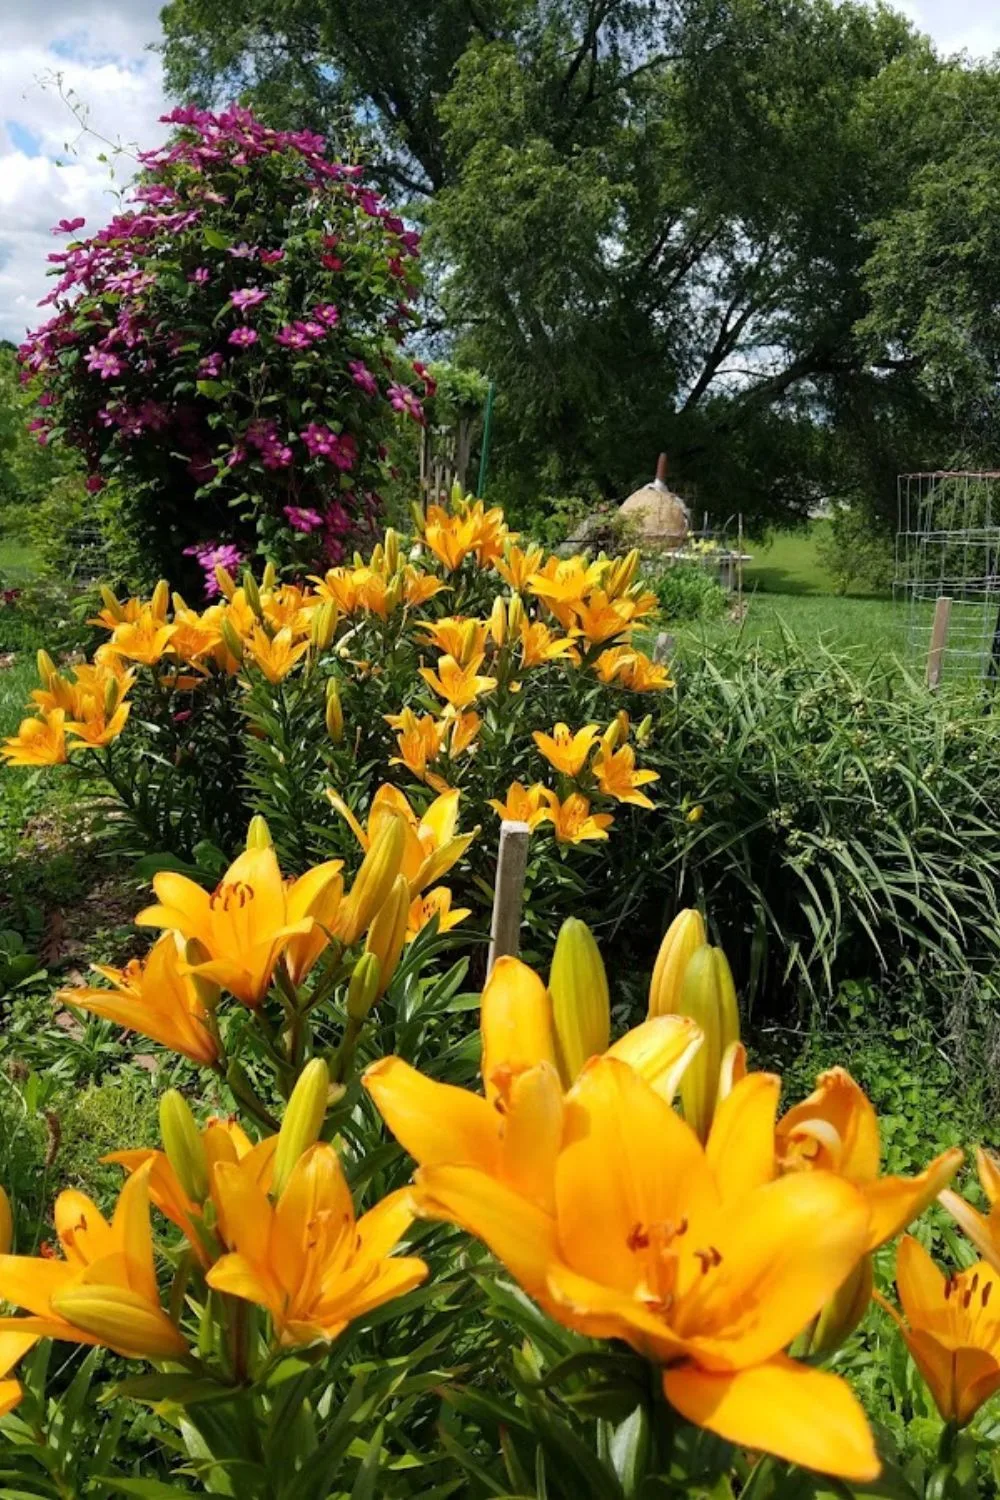 a mass of yellow lilies in front of a trellised purple clematis